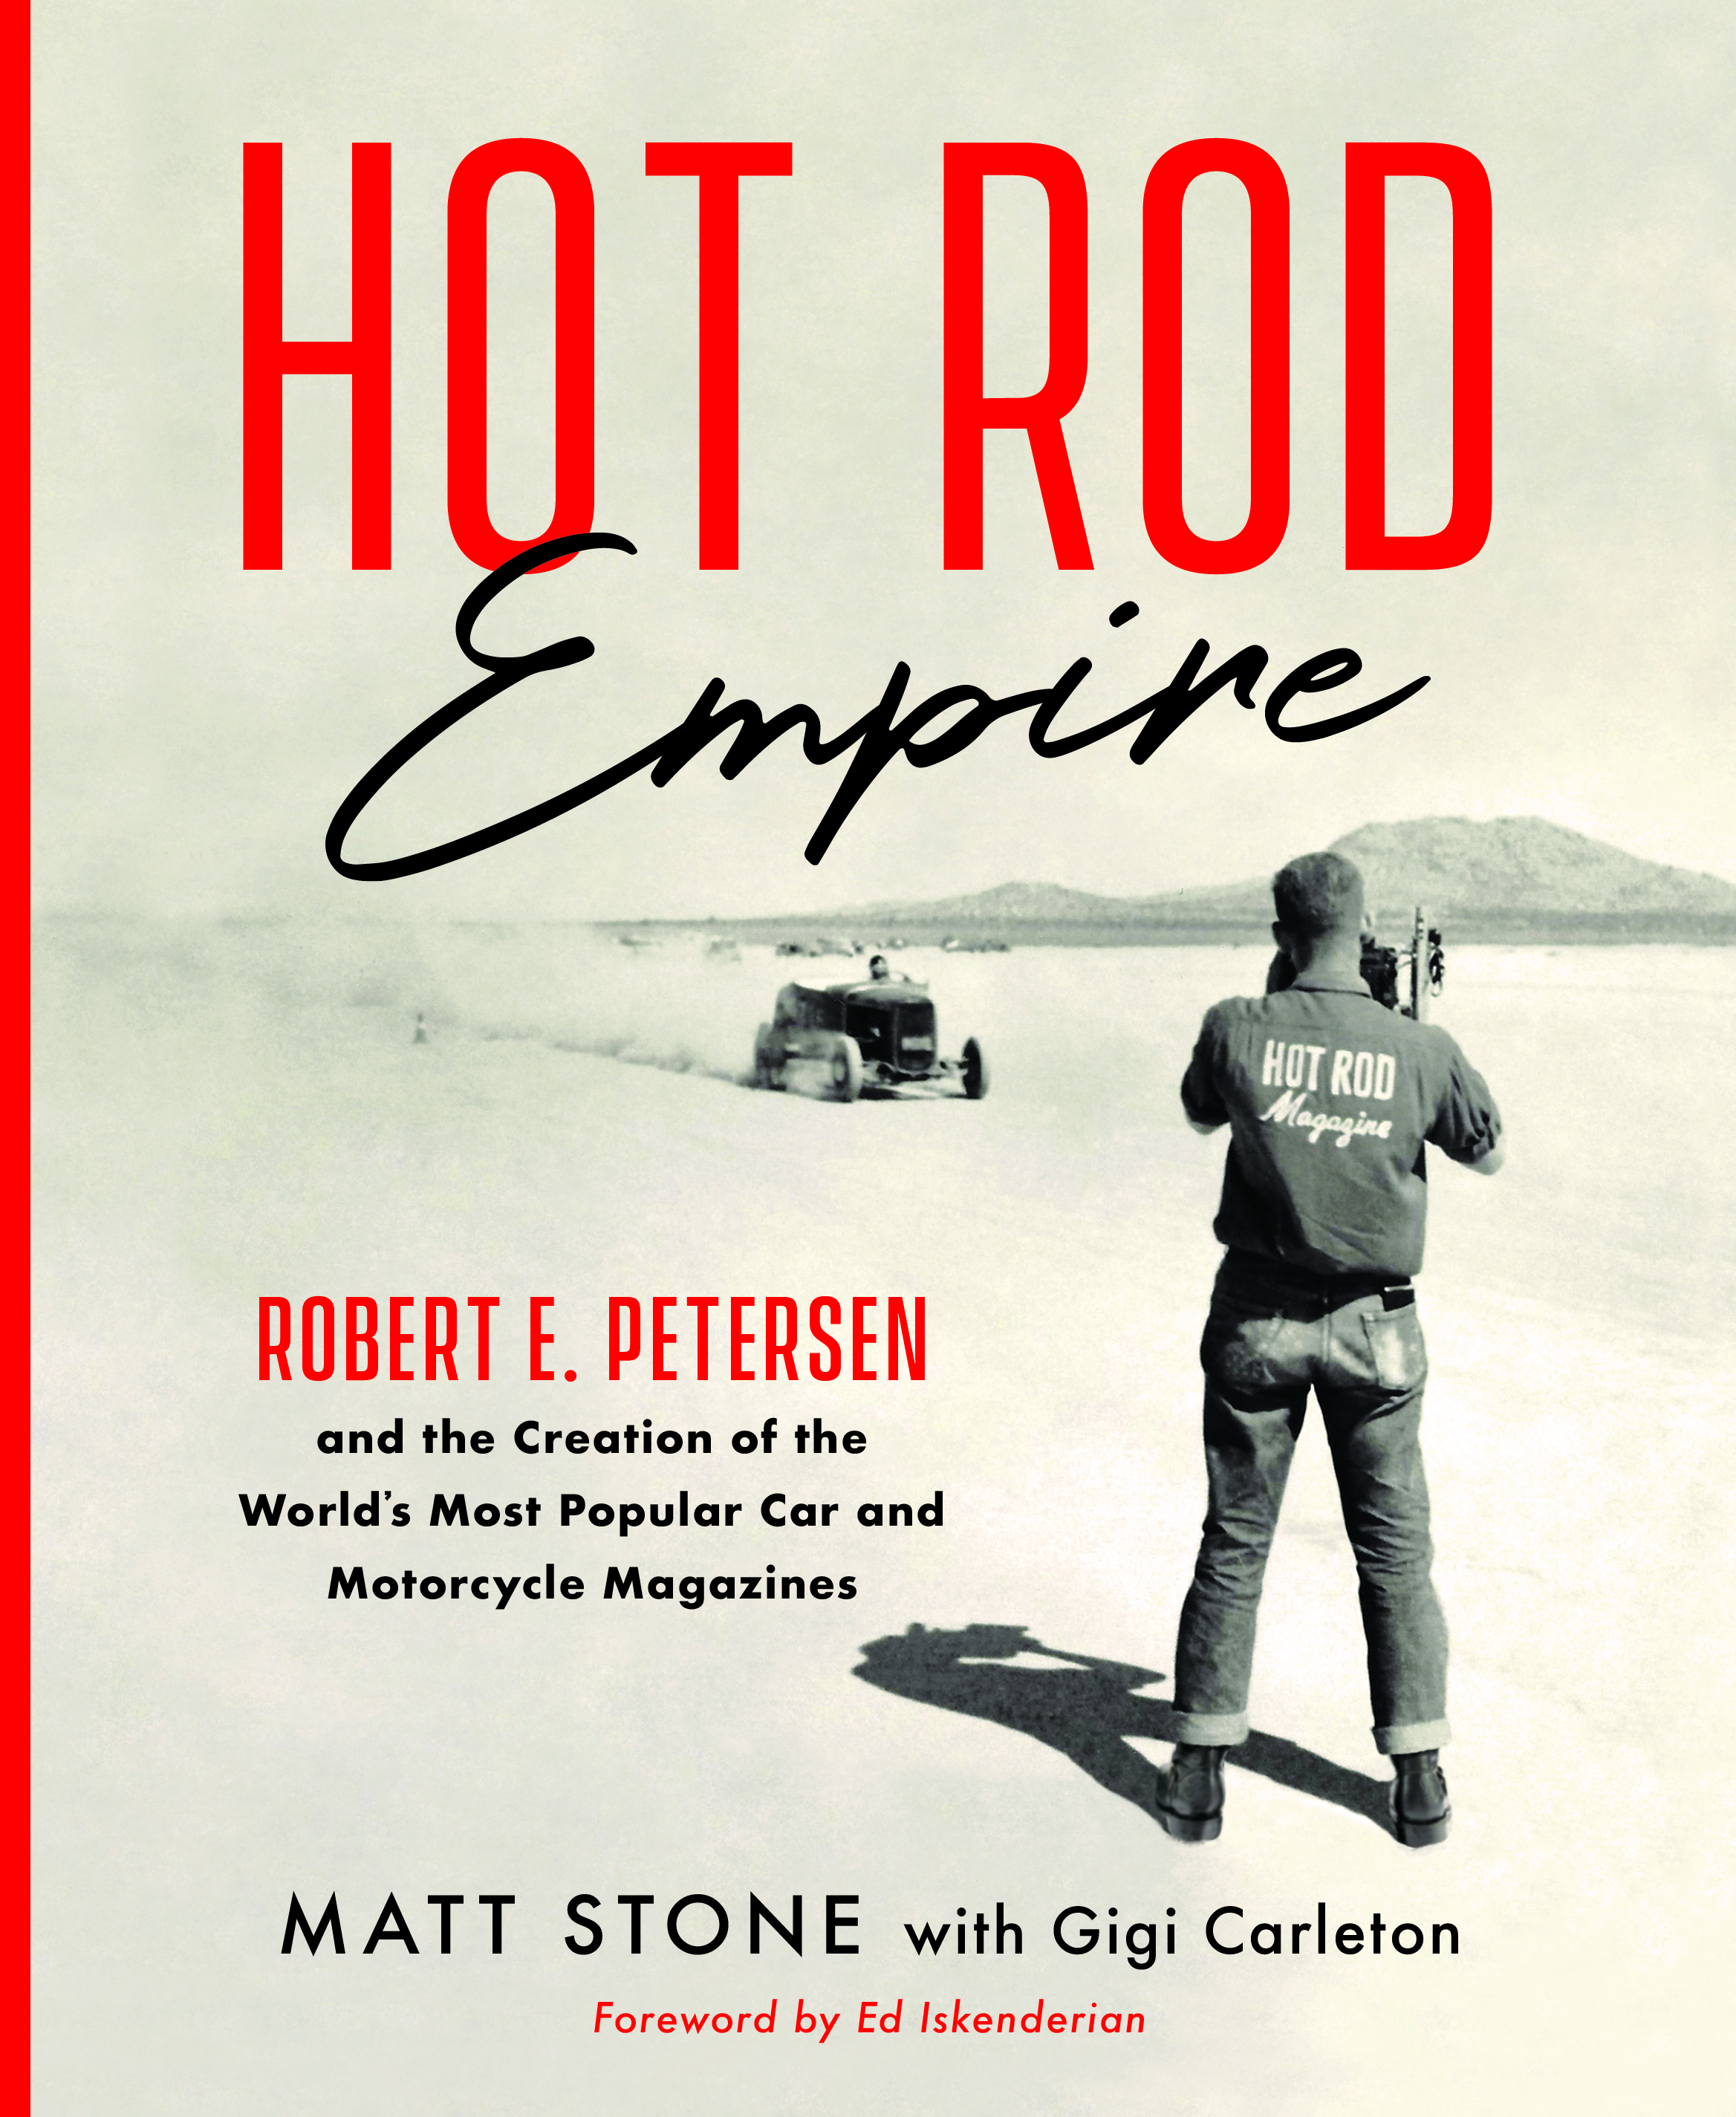 Hollywood, Bookshelf: The true Hollywood story of an empire built on a Hot Rod, ClassicCars.com Journal